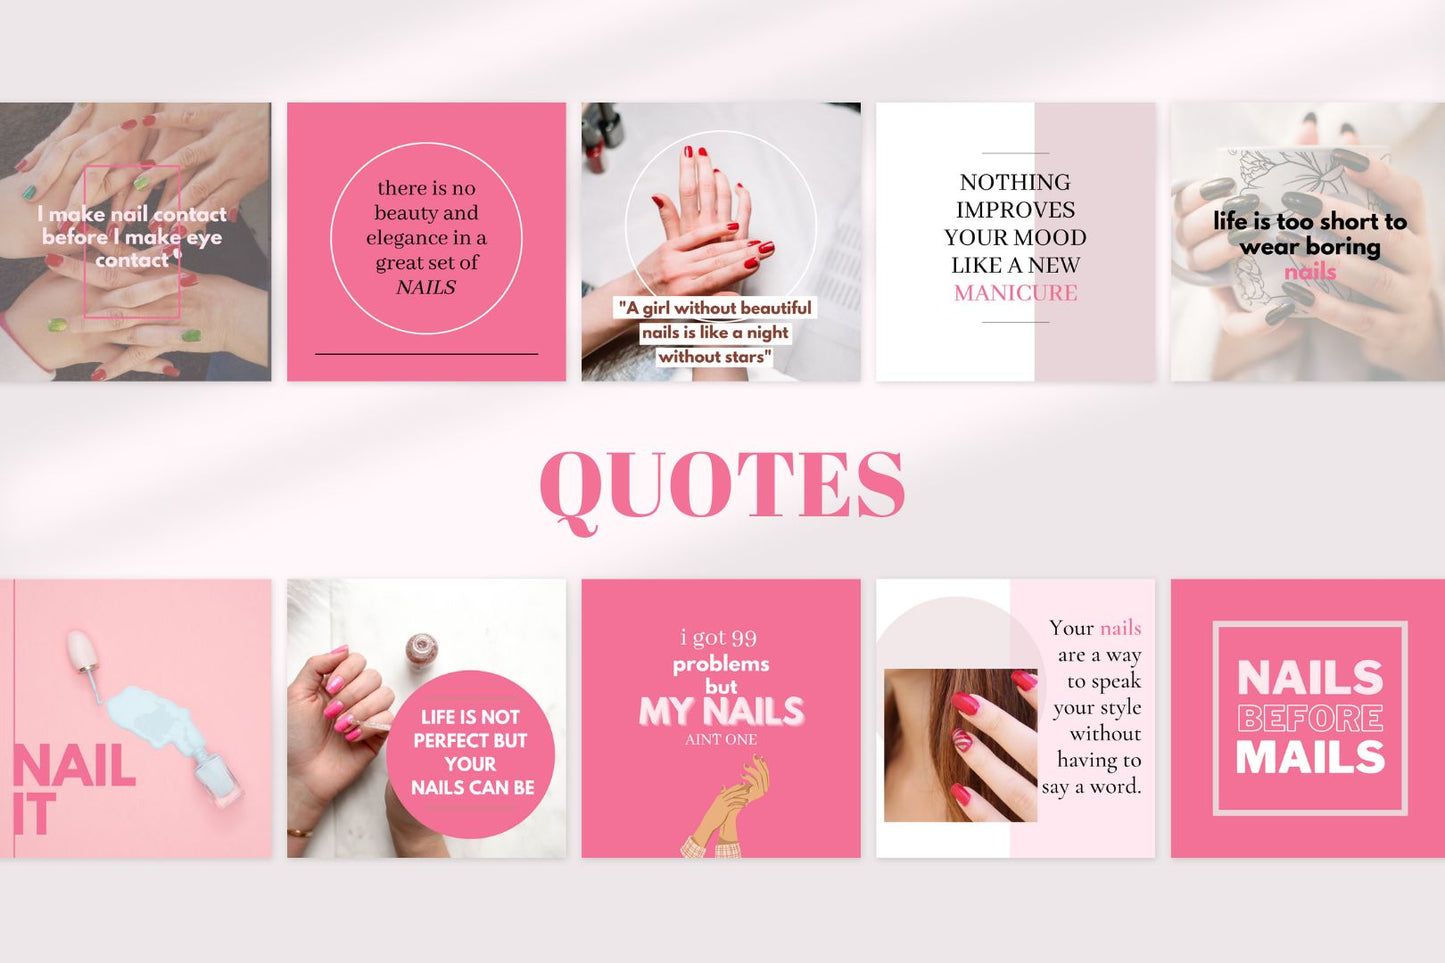 Nail techs template ready to use (Cindy)